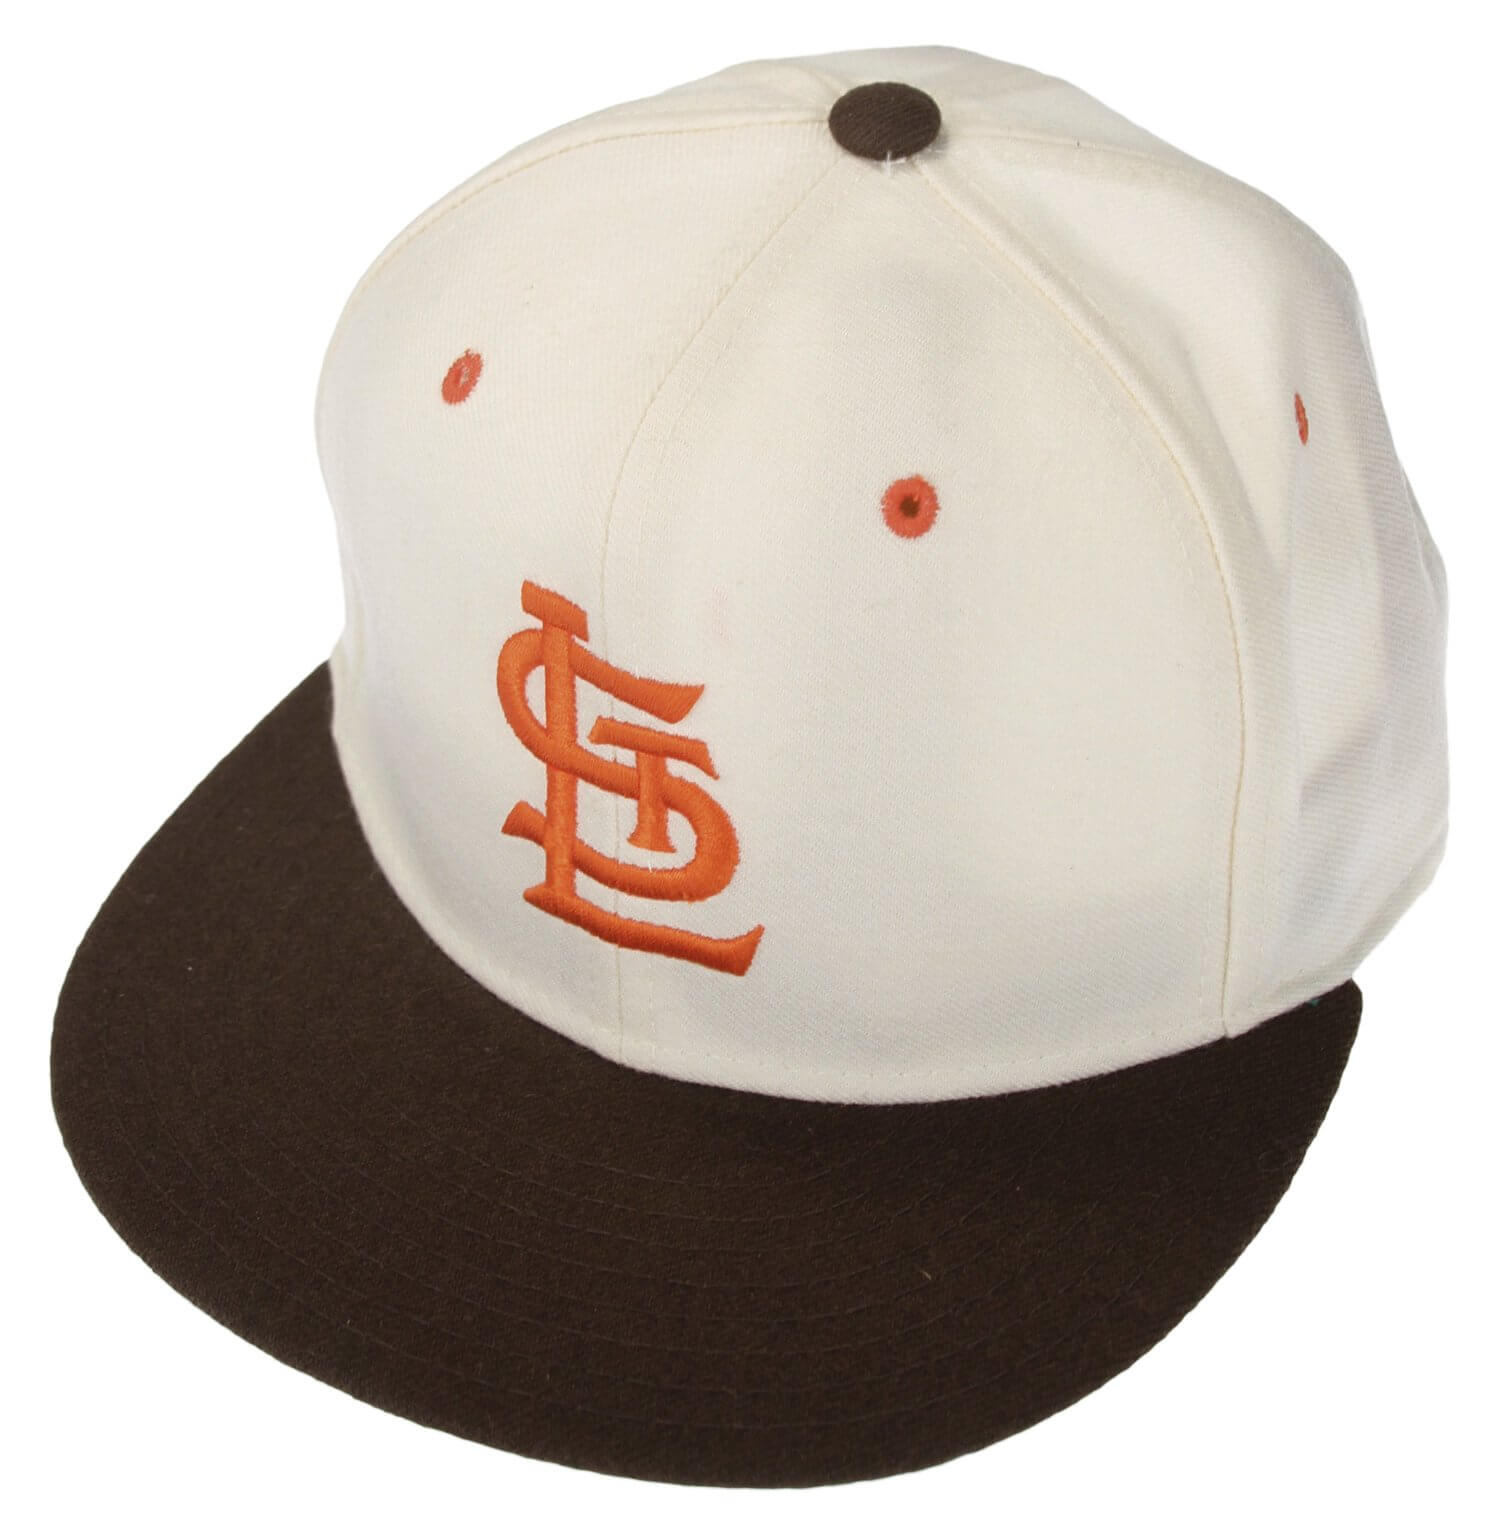 47 Brand St. Louis Browns Cooperstown Clean Up Cap - Brown